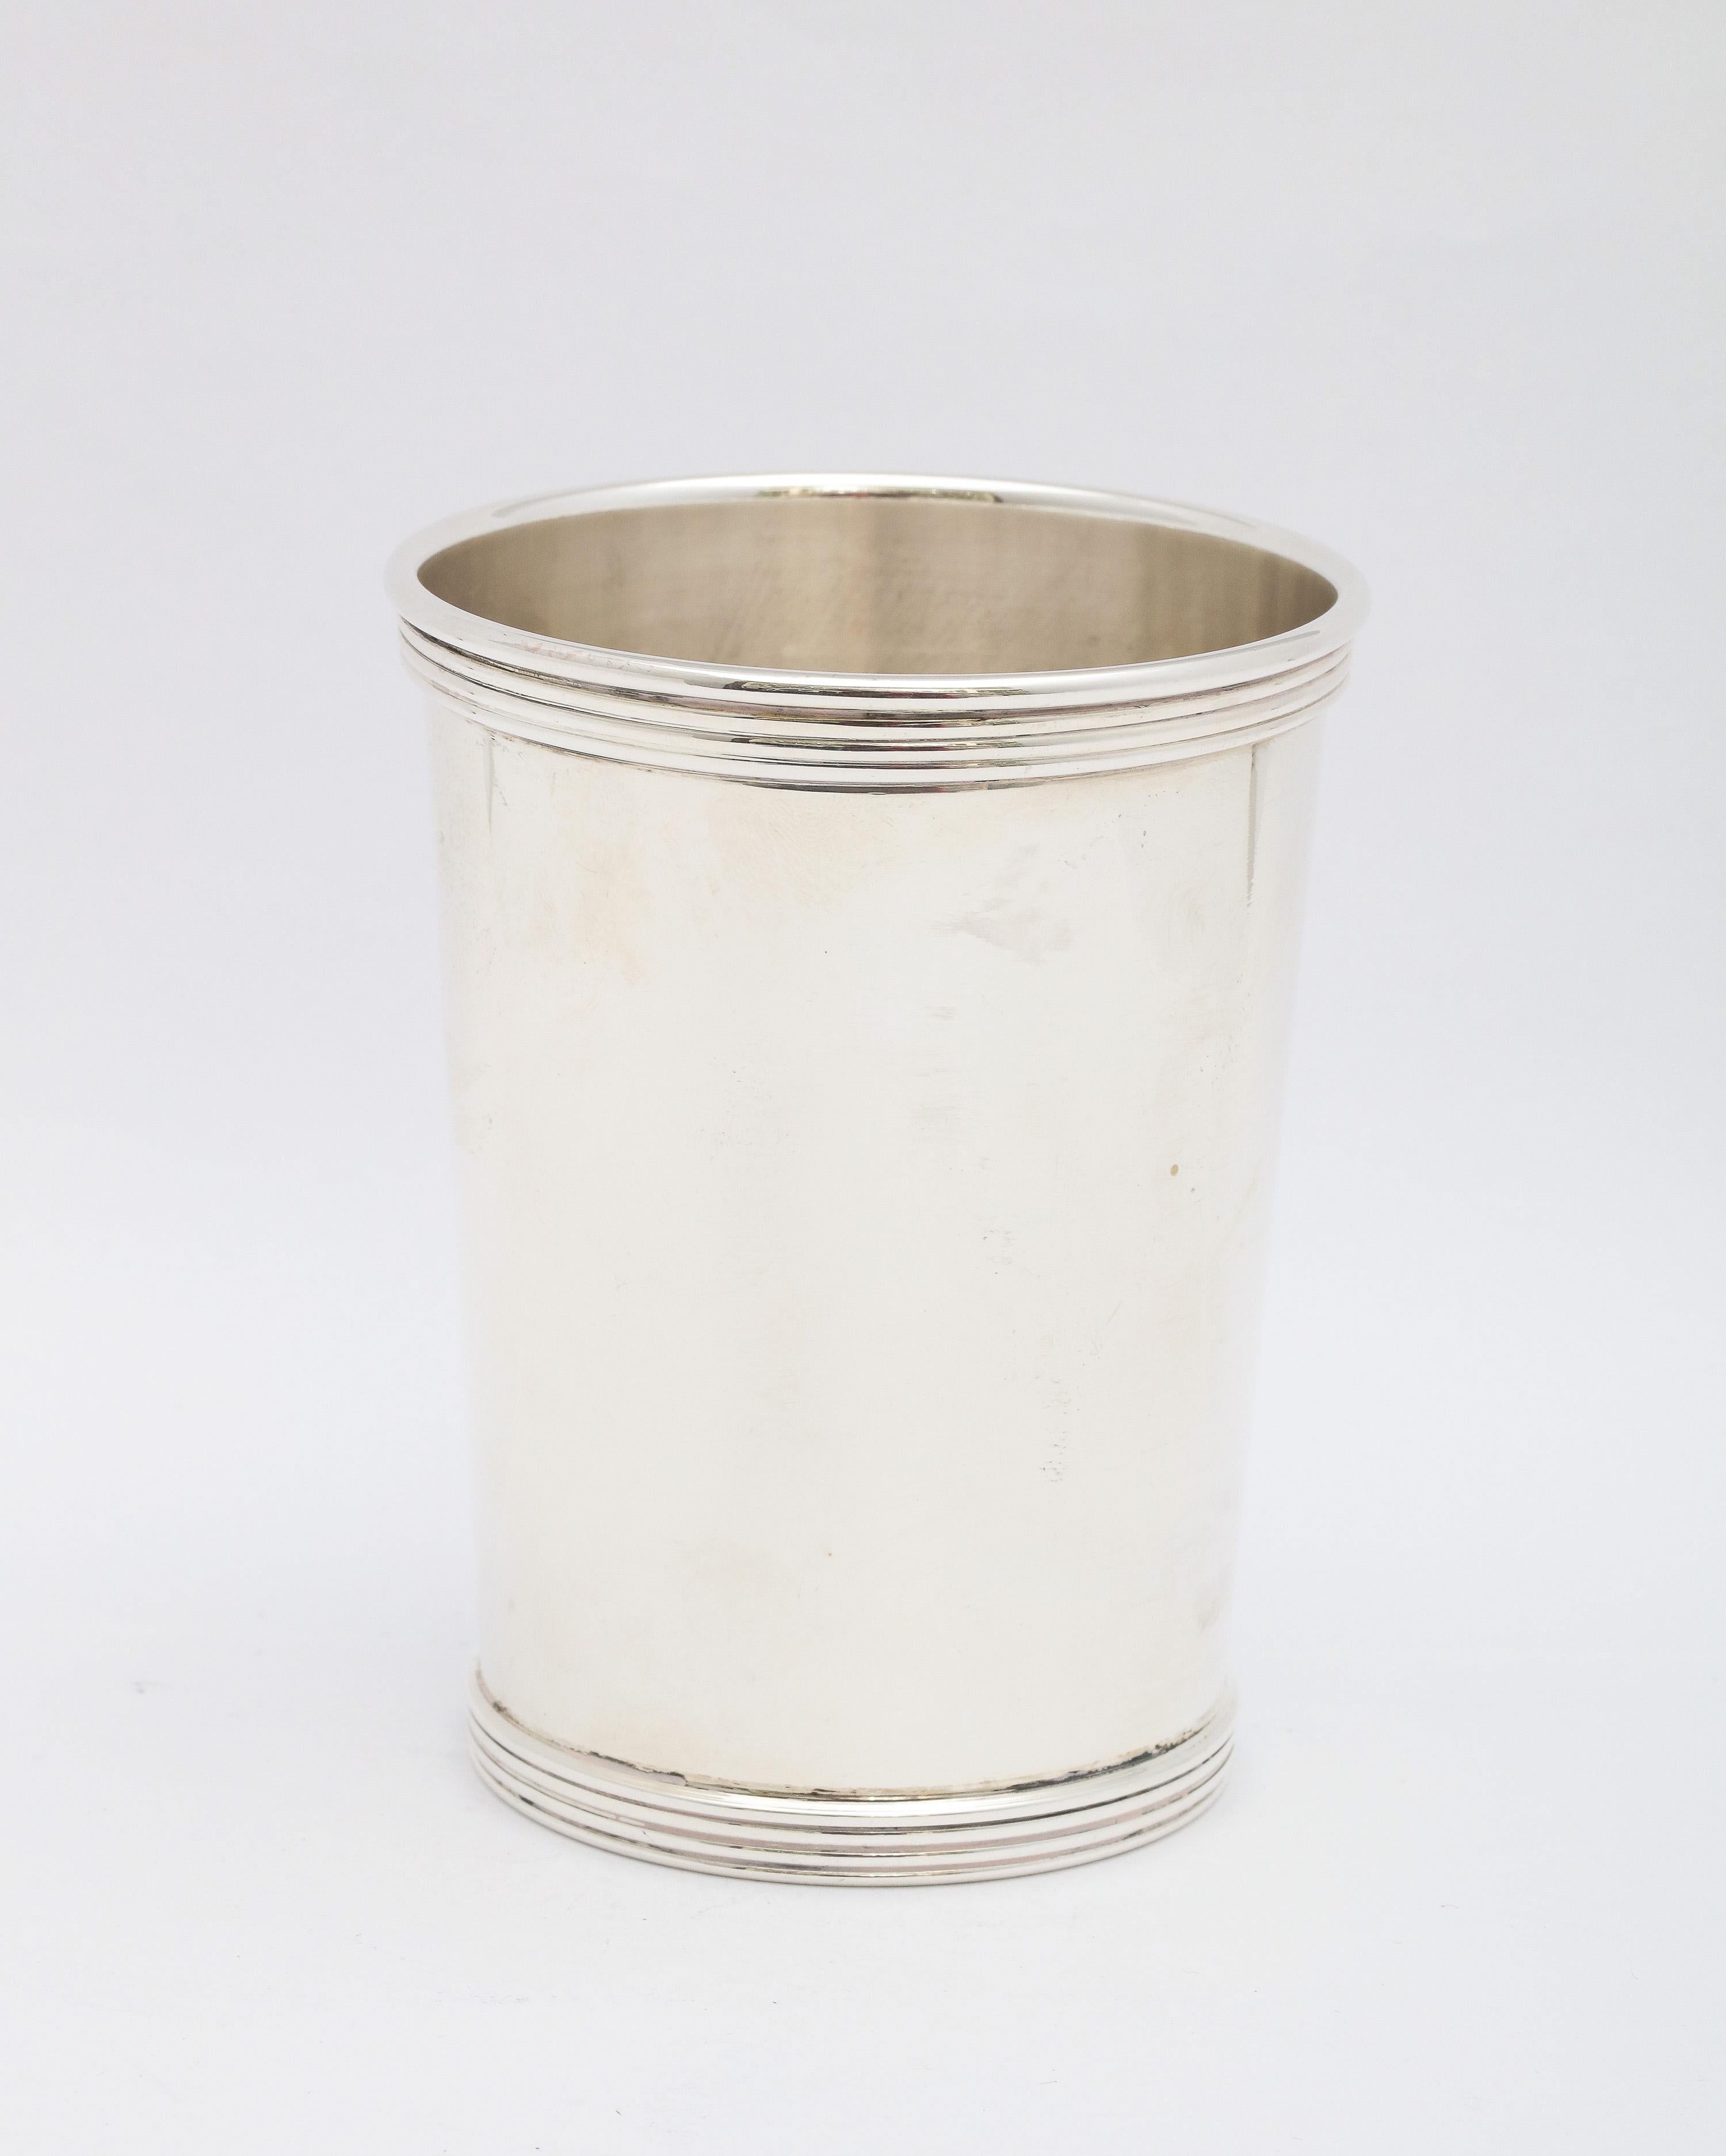 Art Deco Period, sterling silver mint julep cup, International Silver Co., Meriden, Ct., circa 1930s.Measures almost 4 inches high x over 3 inches diameter (at widest point). Weighs 3.945 troy ounces. Lightly gilt interior. Dark areas on sterling